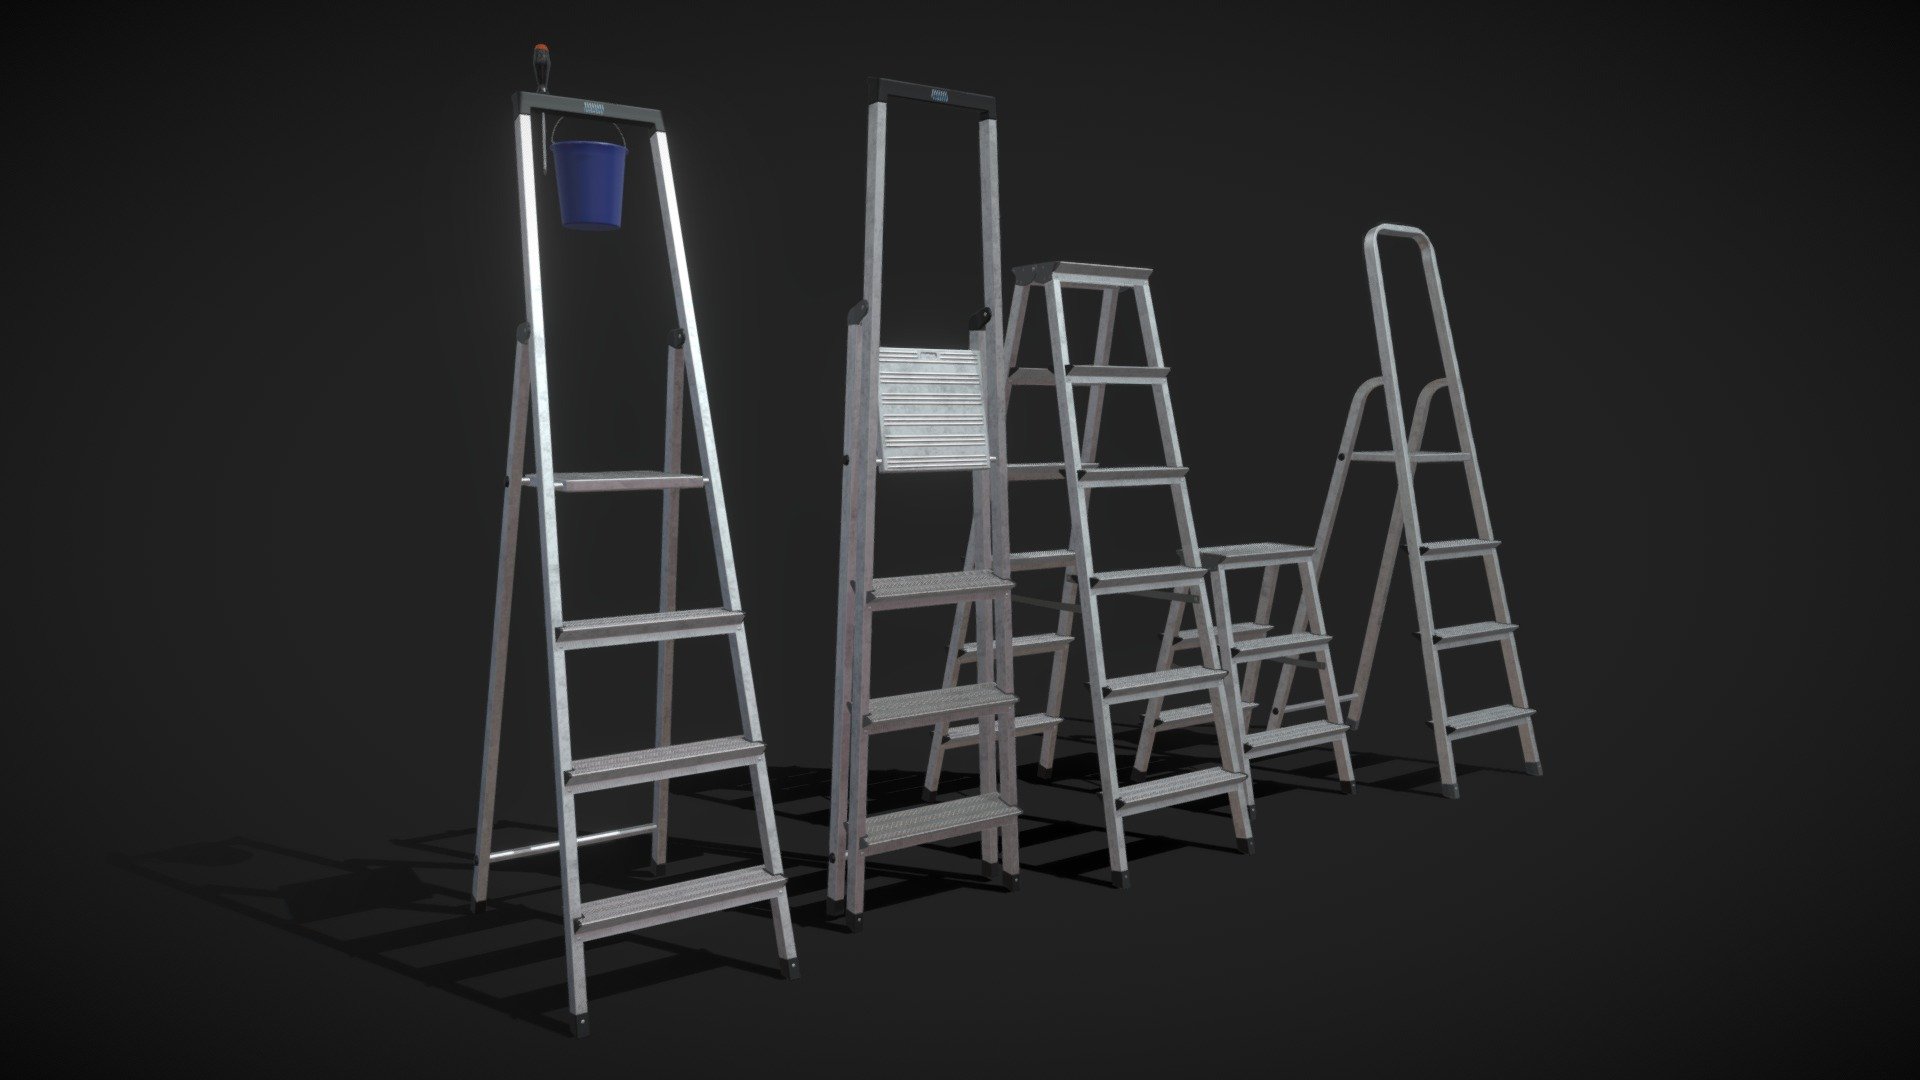 Step ladders set KRAUSE.

This set:




1 file obj standard

1 file 3ds Max 2013 vray material

1 file 3ds Max 2013 corona material

1 file 3ds Max 2013 standard material

1 file of 3Ds

1 file blender.

Topology of geometry:




forms and proportions of The 3D model

the geometry of the model was created very neatly

there are no many-sided polygons

detailed enough for close-up renders

the model optimized for turbosmooth modifier

Not collapsed the turbosmooth modified

apply the Smooth modifier with a parameter to get the desired level of detail

Materials and Textures:




3ds max files included Vray-Shaders

3ds max files included Corona-Shaders

3ds max files included Standard

file blender full set of materials

all texture paths are cleared

Organization of scene:




to all objects and materials

real world size (system units - mm)

coordinates of location of the model in space (x0, y0, z0)

does not contain extraneous or hidden objects (lights, cameras, shapes etc.)
 - Step ladders set KRAUSE - Buy Royalty Free 3D model by madMIX 3d model